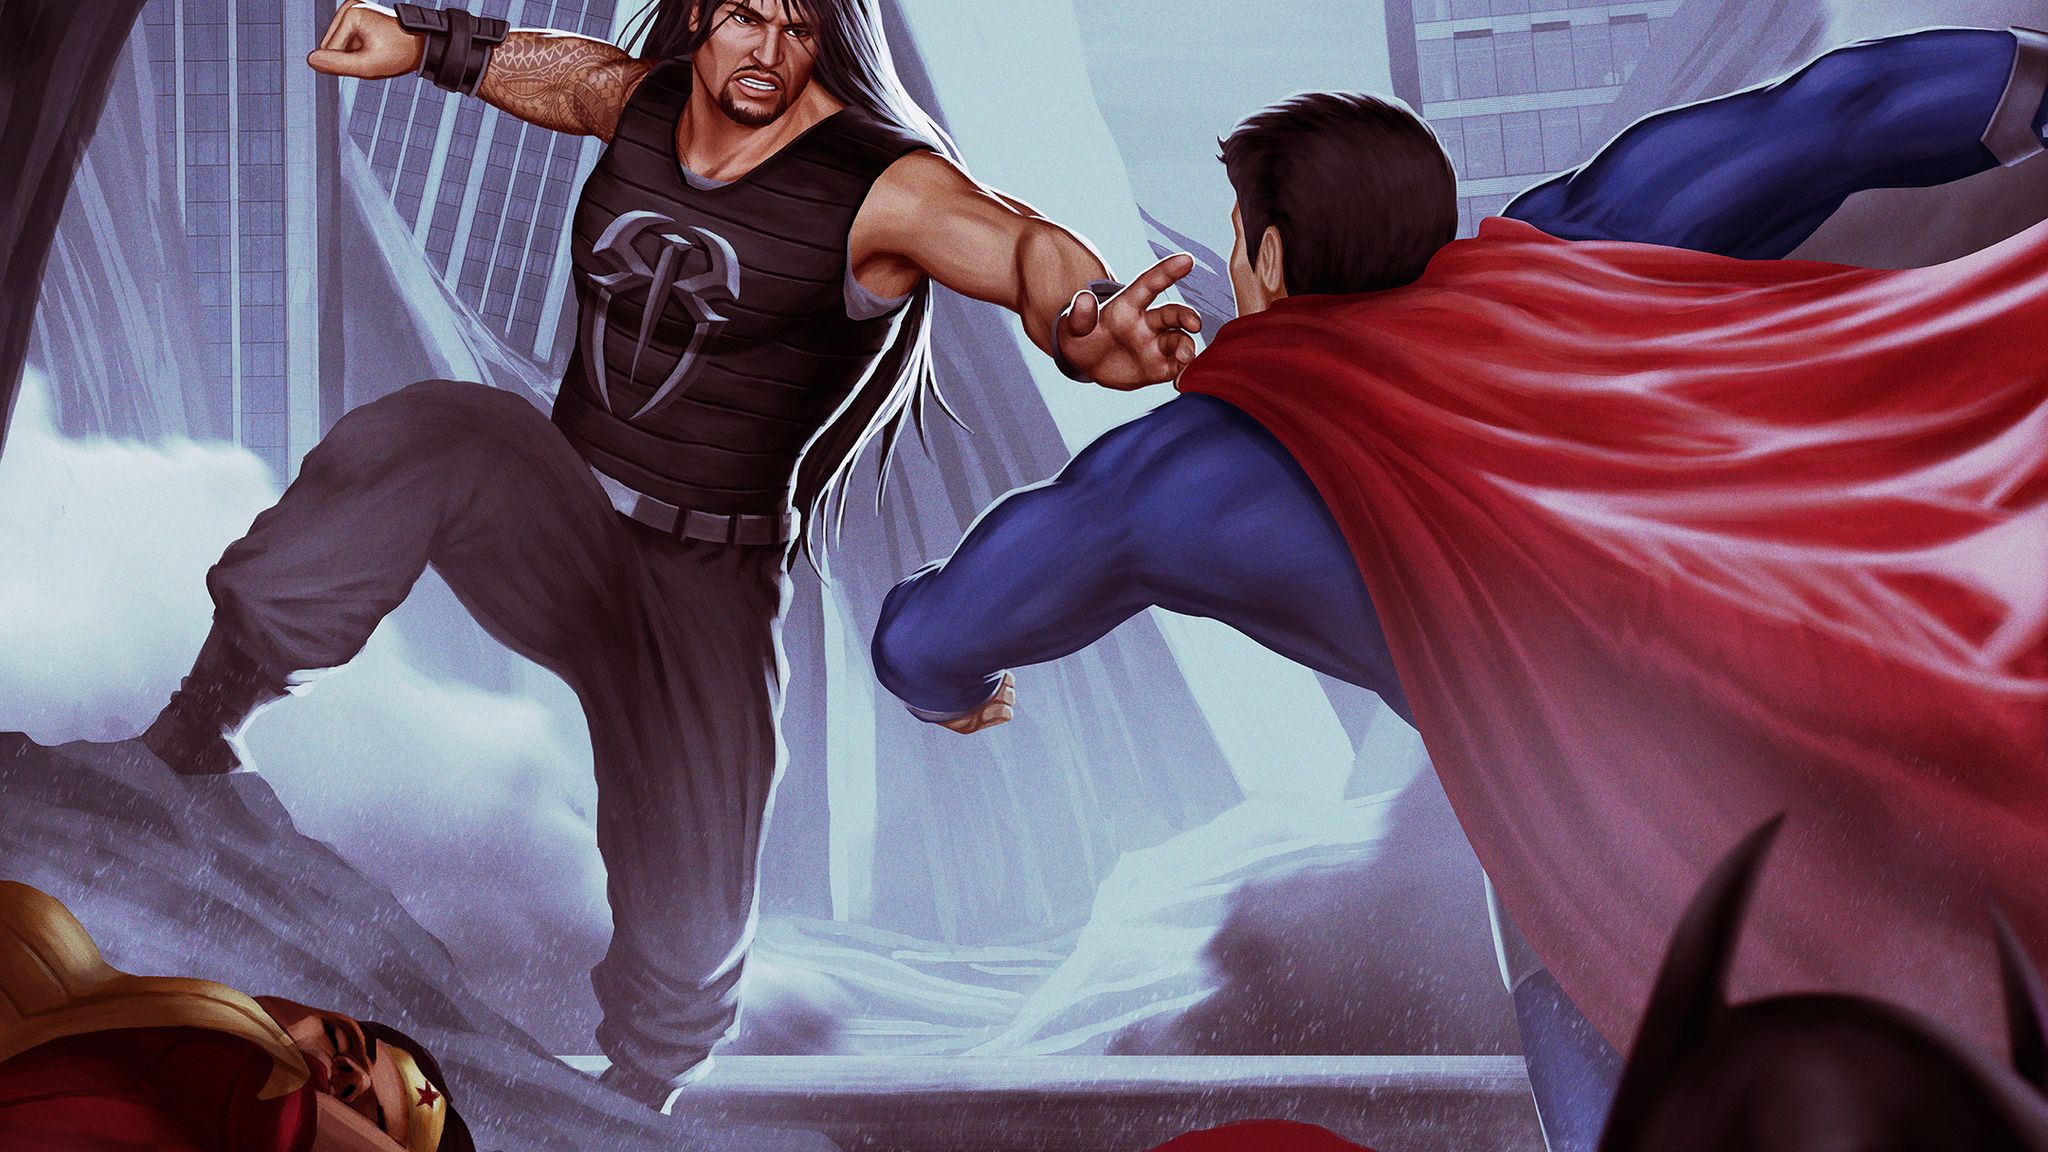 Roman Reigns Vs Superman Art 2048x1152 Resolution HD 4k Wallpaper, Image, Background, Photo and Picture